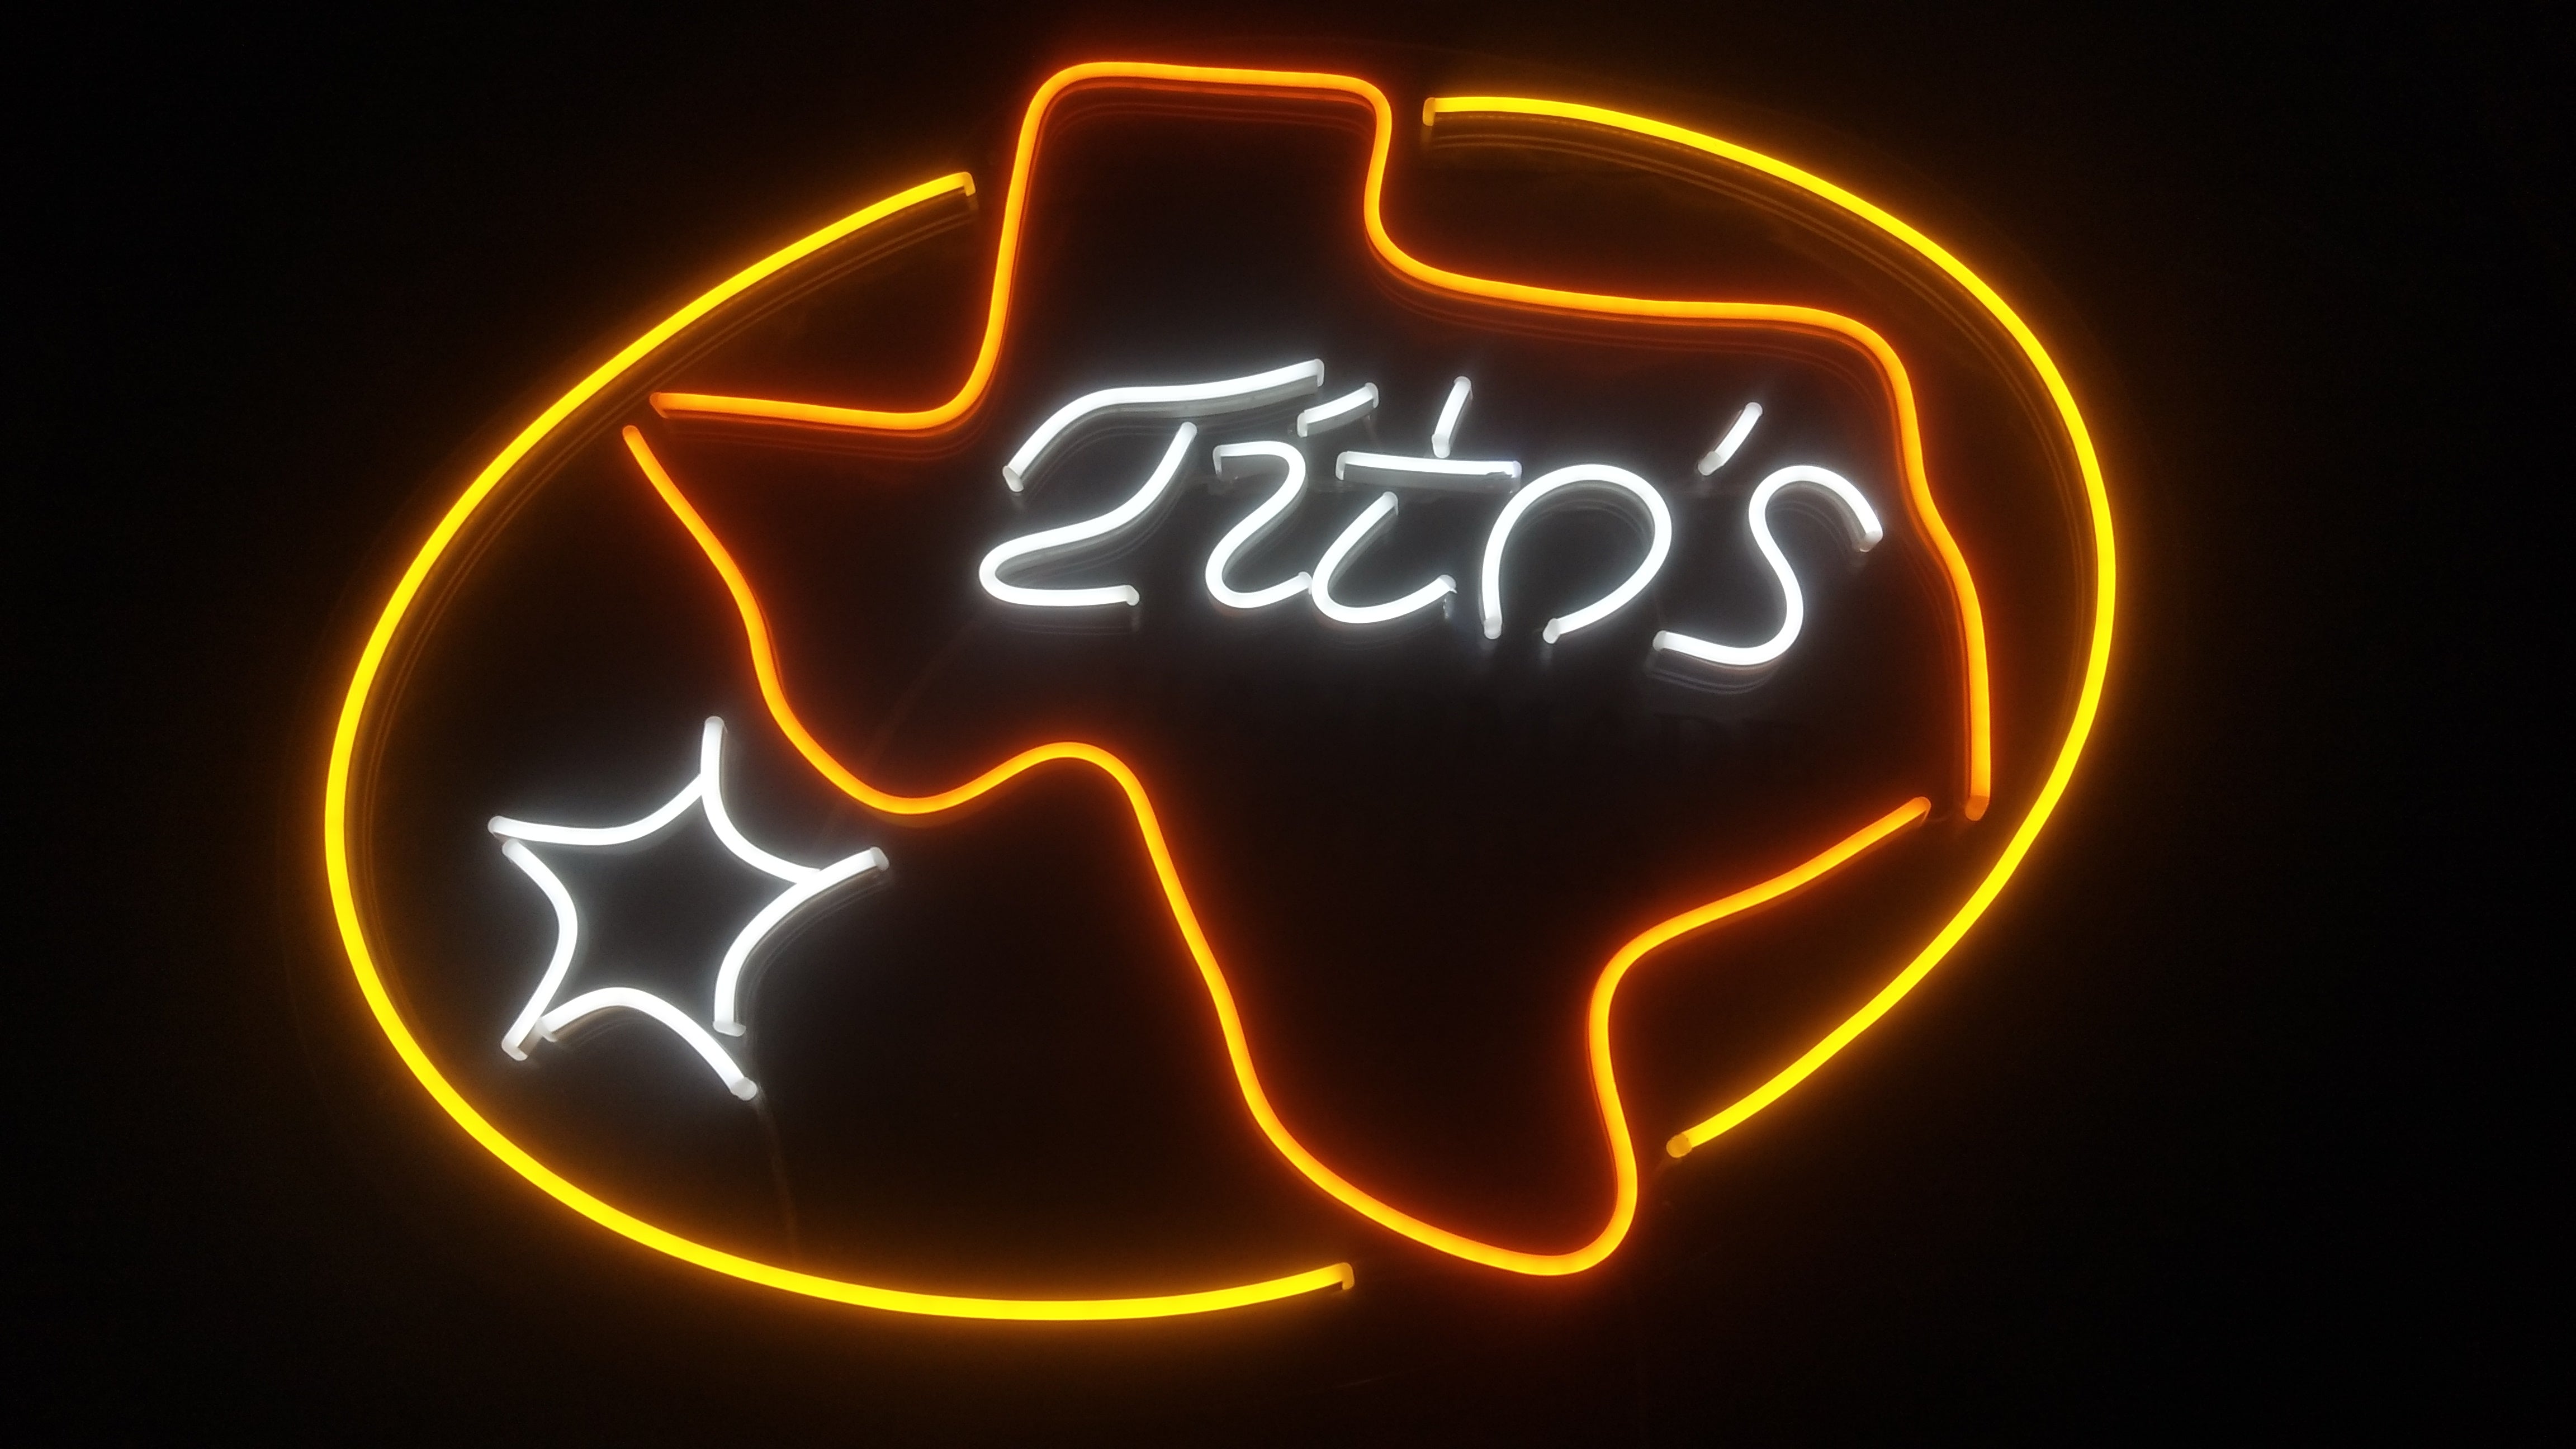 Tito's sign made with neon led